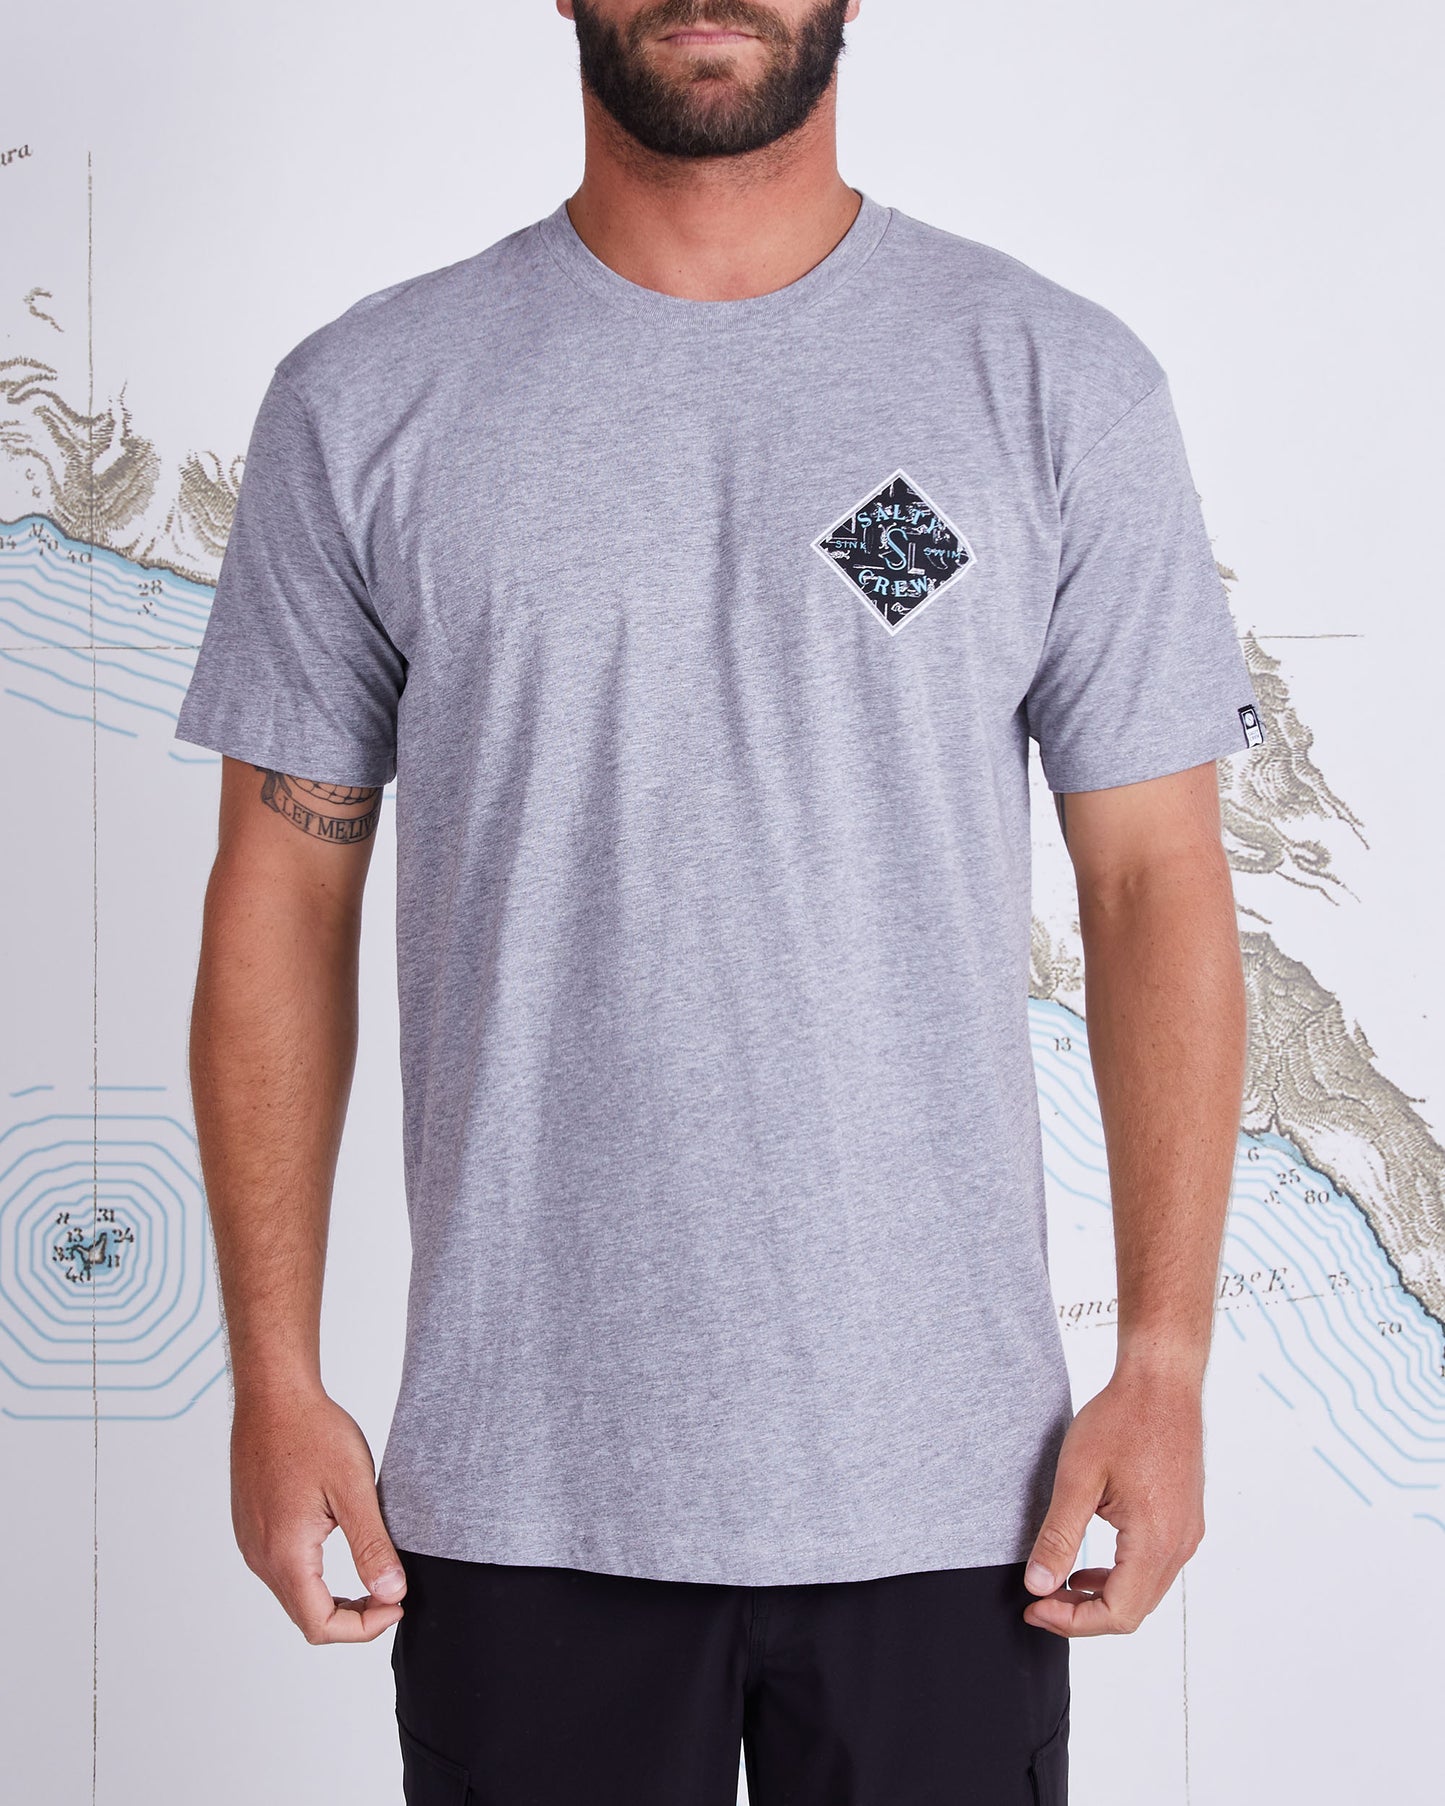 TIPPET TACKLE PREMIUM S/S TEE - Athletic Heather